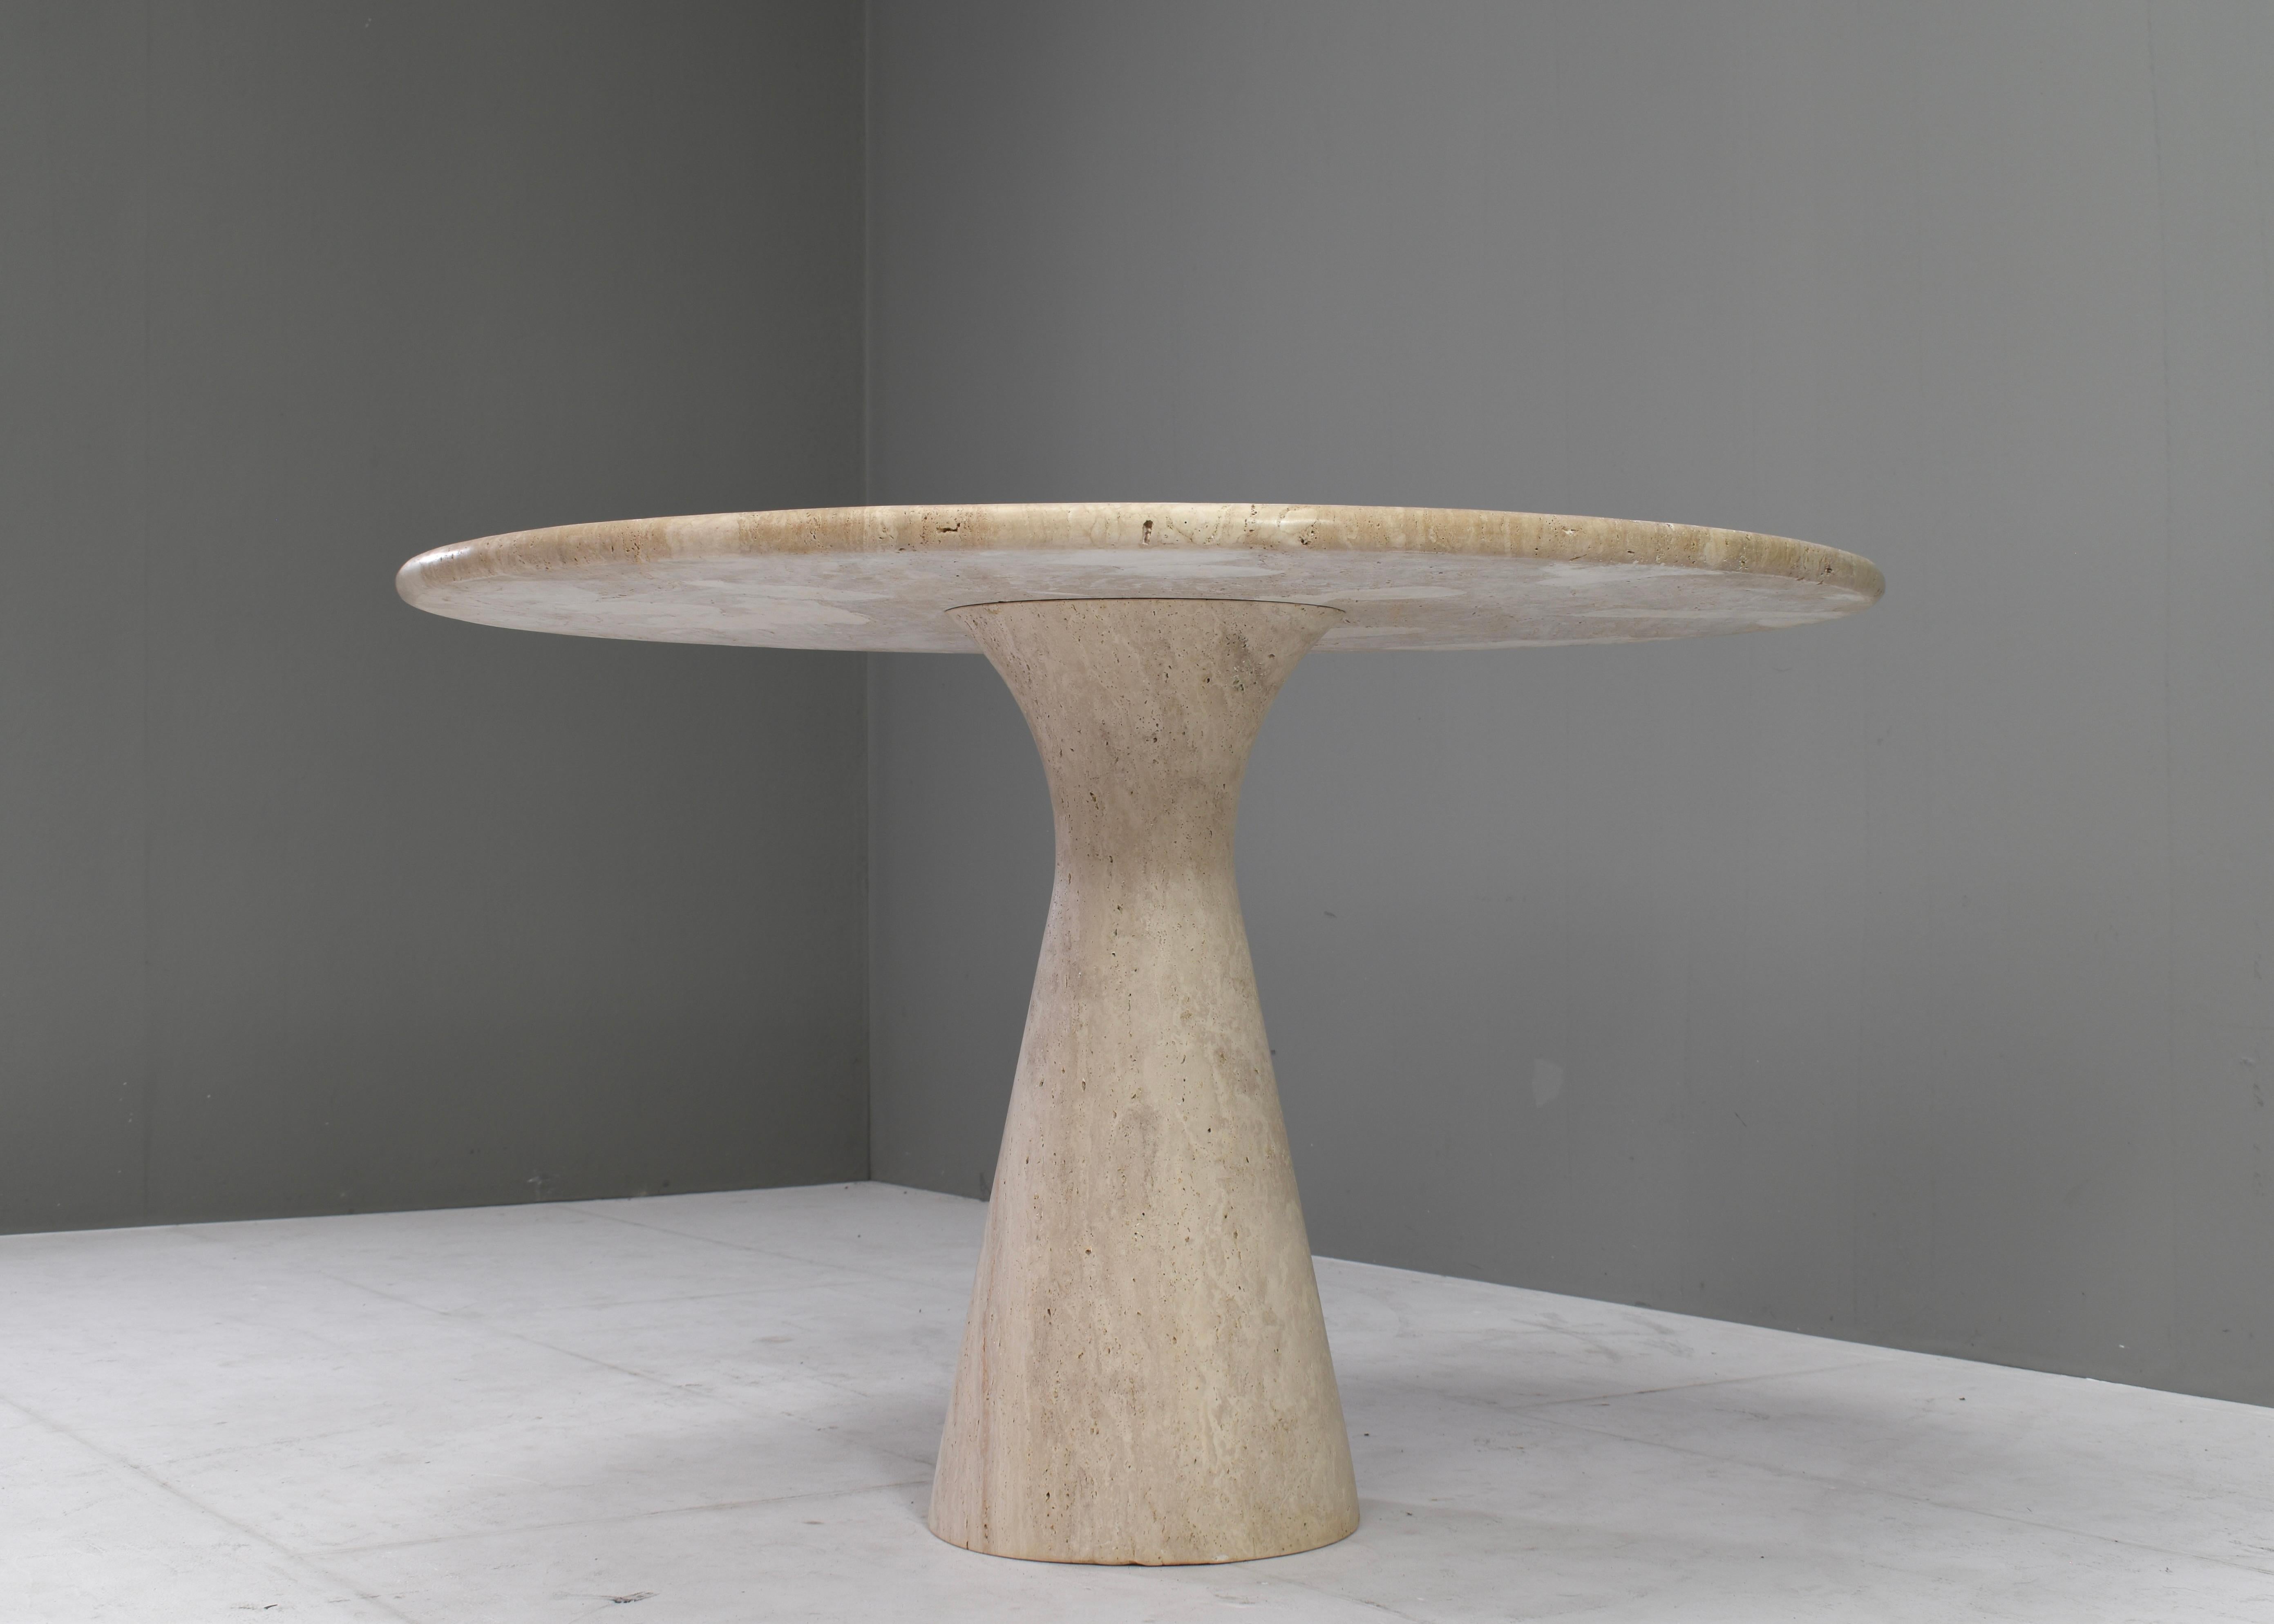 Exquisite Round Travertine Dining Table in the manor of Angelo Mangiarotti/Up&Up 1